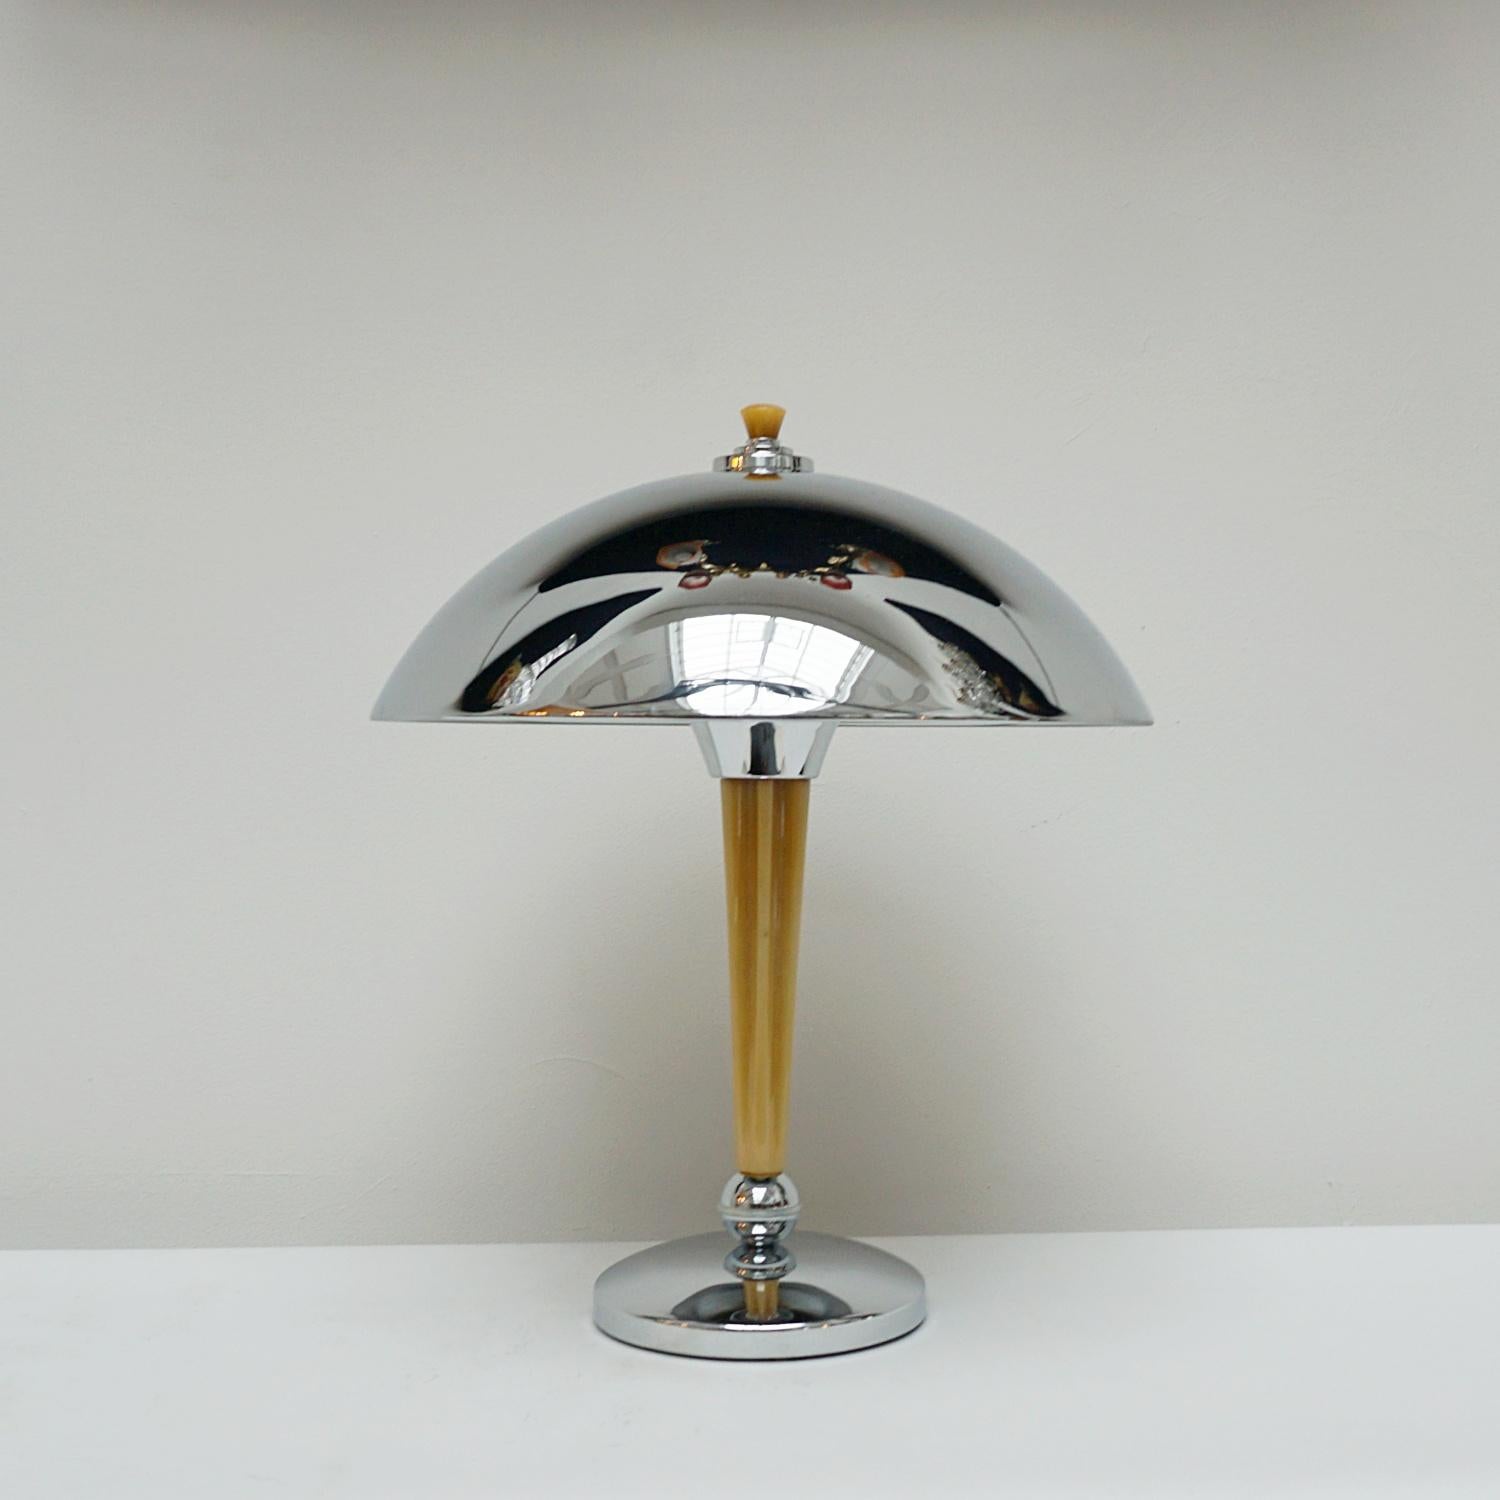 A pair of Art Deco style dome lamps. Fluted tube of marbled yellow bakelite stem, set over a chromed metal base. Yellow finial topped chromed metal shade. 

Dimensions: H 44cm Diameter of shade: 35cm, of base: 16cm

Item Number: J294

All of our